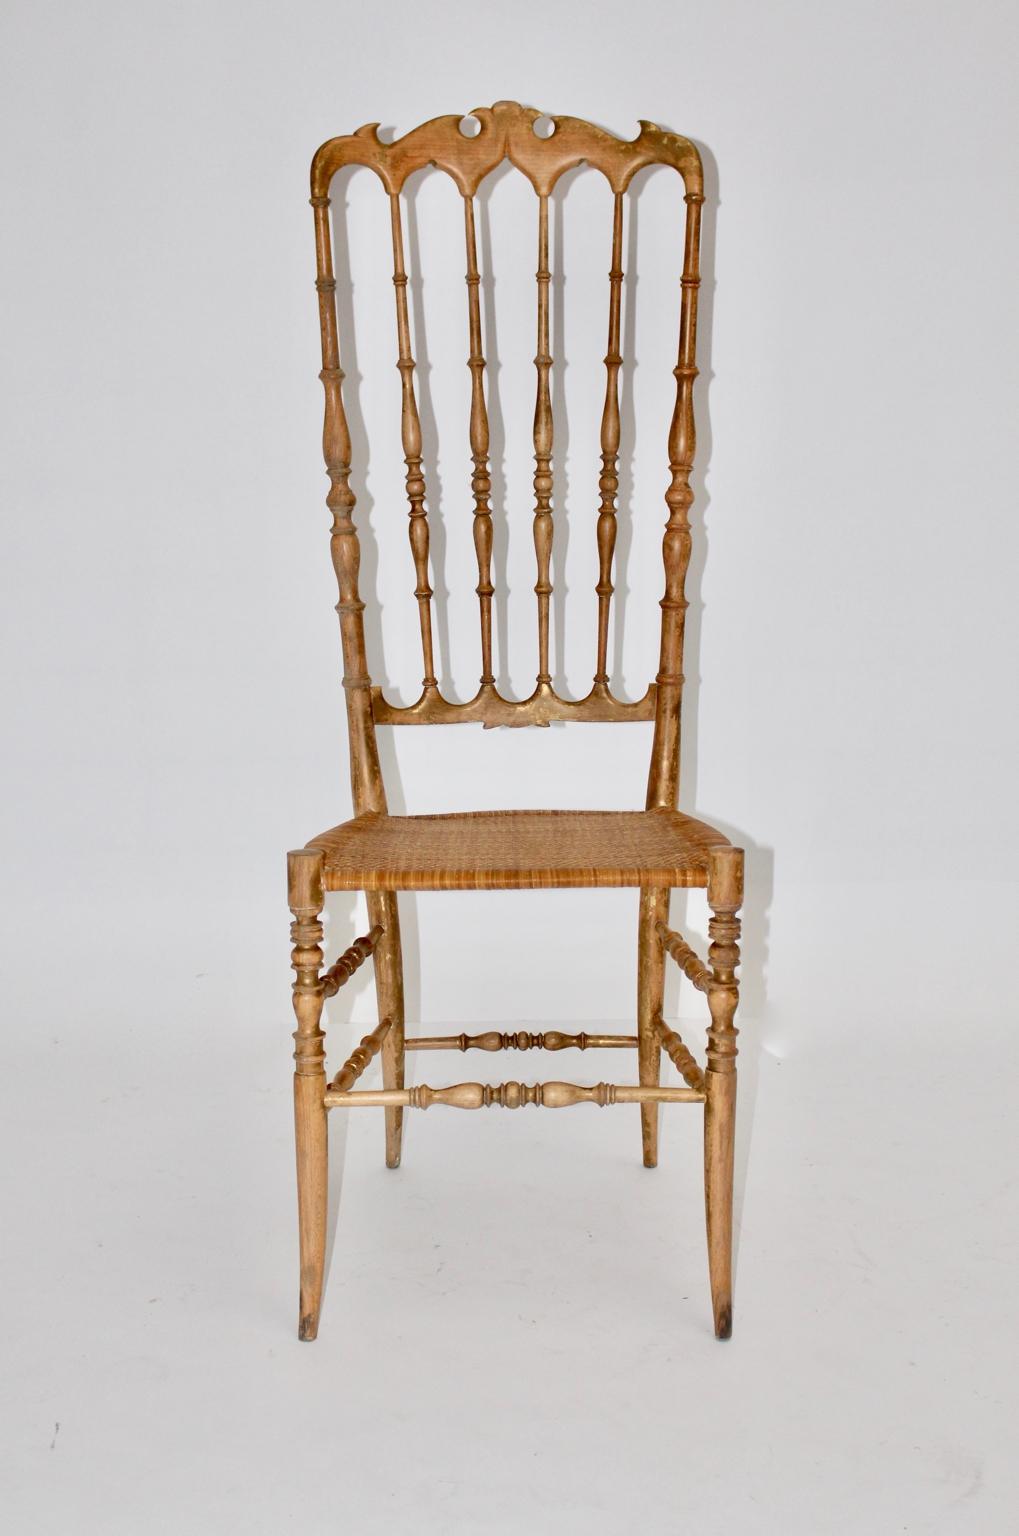 Mid Century Modern extra high back vintage side chair Chiavari from beechwood with partly gilded rests at the surface. The beautiful chair shows a hand - caned seat.

Very good vintage condition with minor signs of age. 
approx. measures:
Width: